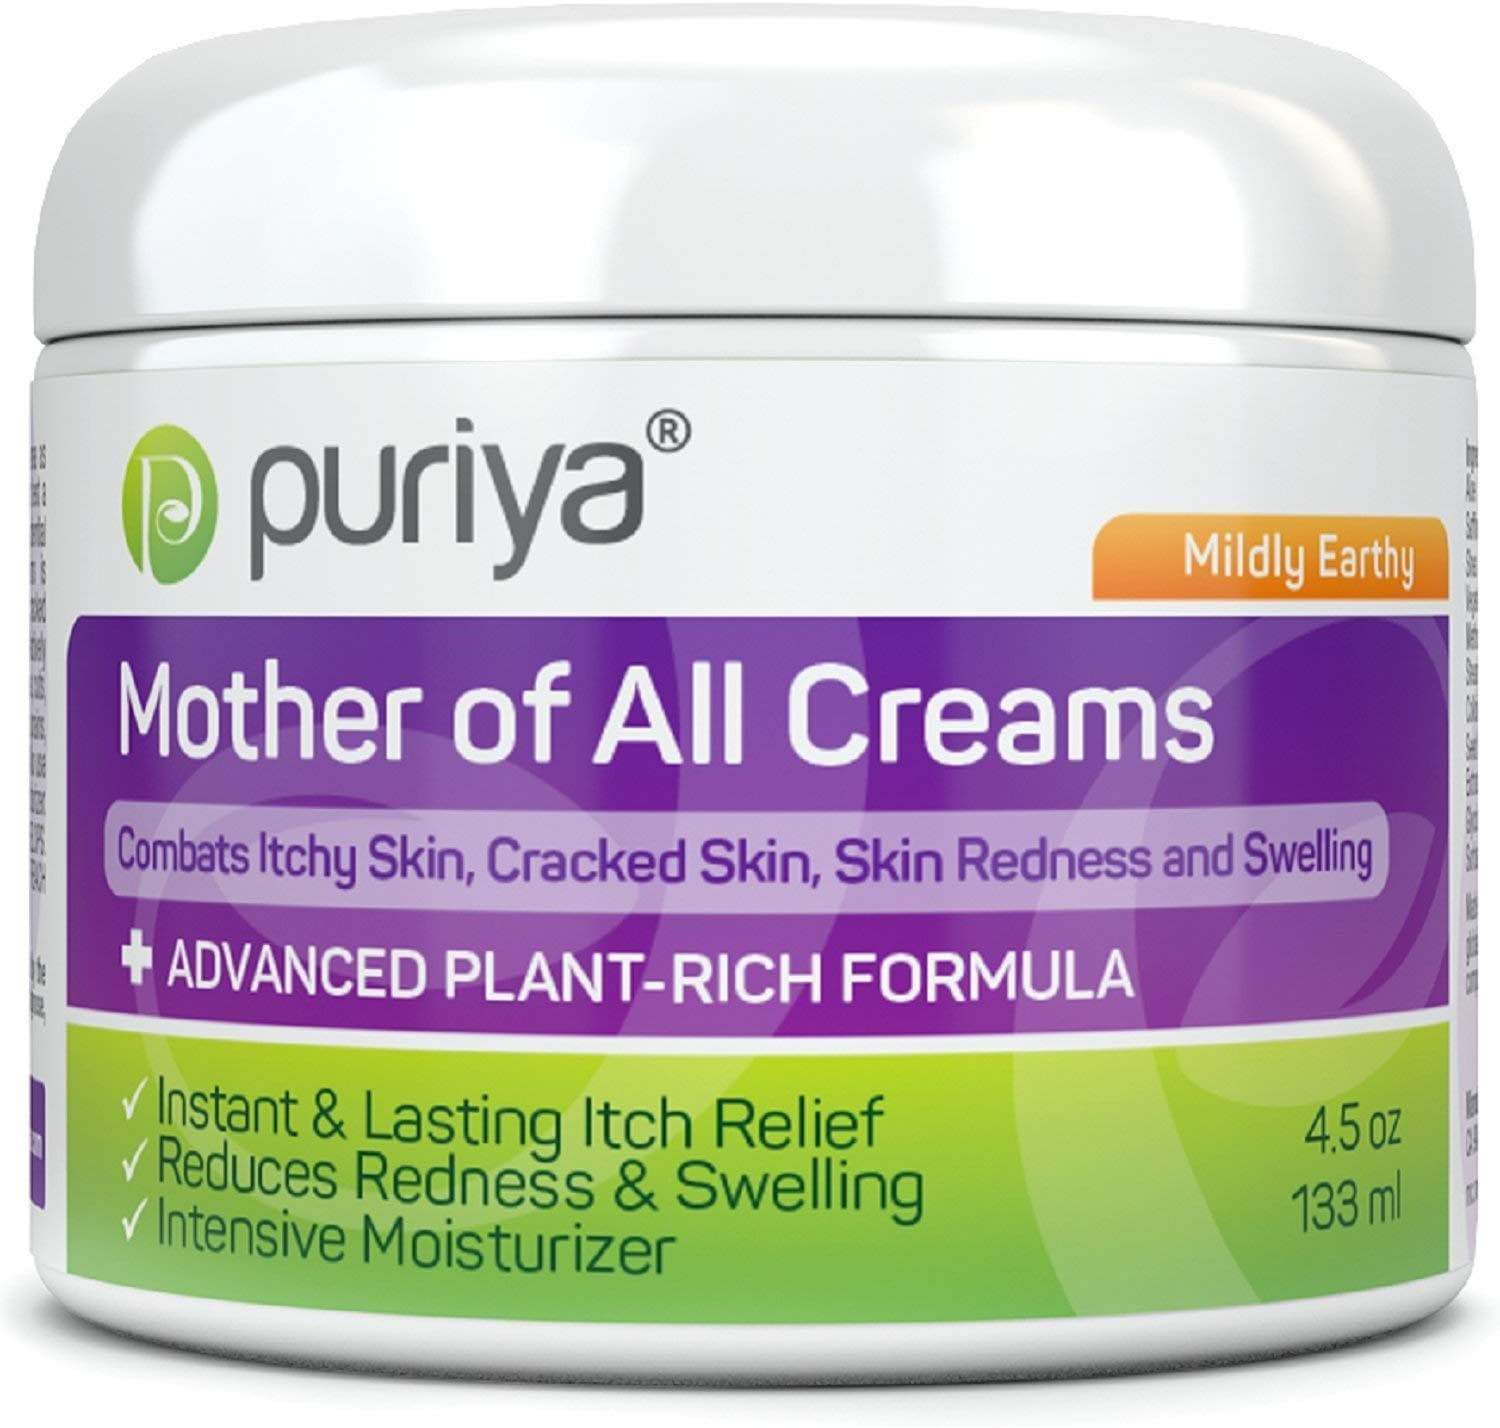 Puriya Cream For Eczema, Psoriasis, Rosacea, Dermatitis, Shingles and Rashes- Mildly Earthy (4.5 oz), Skin Care, London Loves Beauty